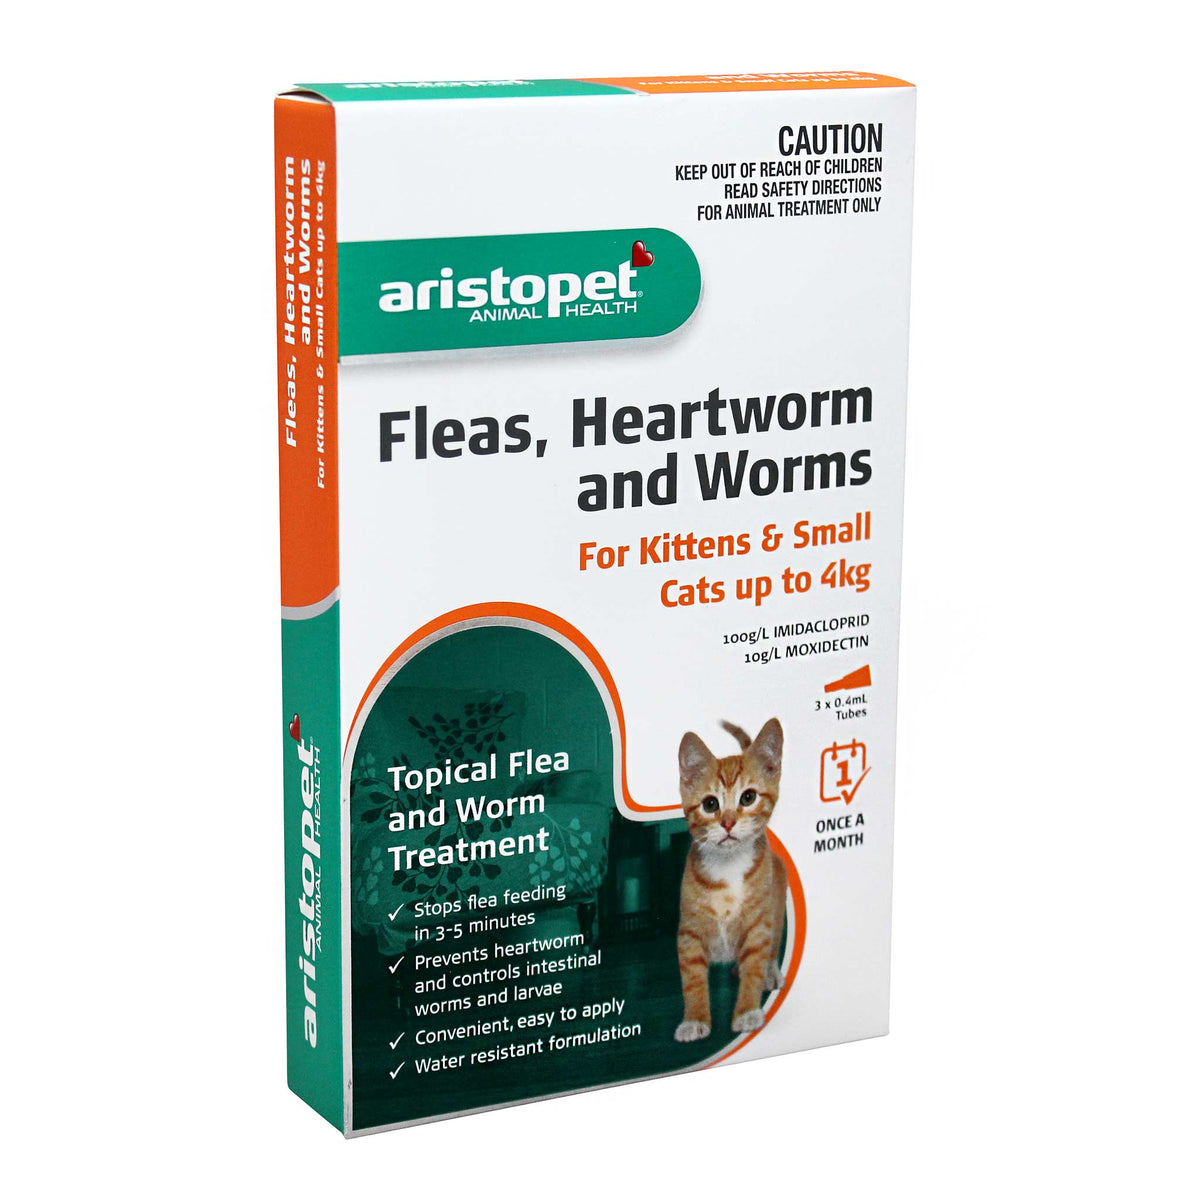 Aristopet Fleas, Heartworm &amp; Worms Spot-on Treatment for Kittens &amp; Small Cats up to 4kg